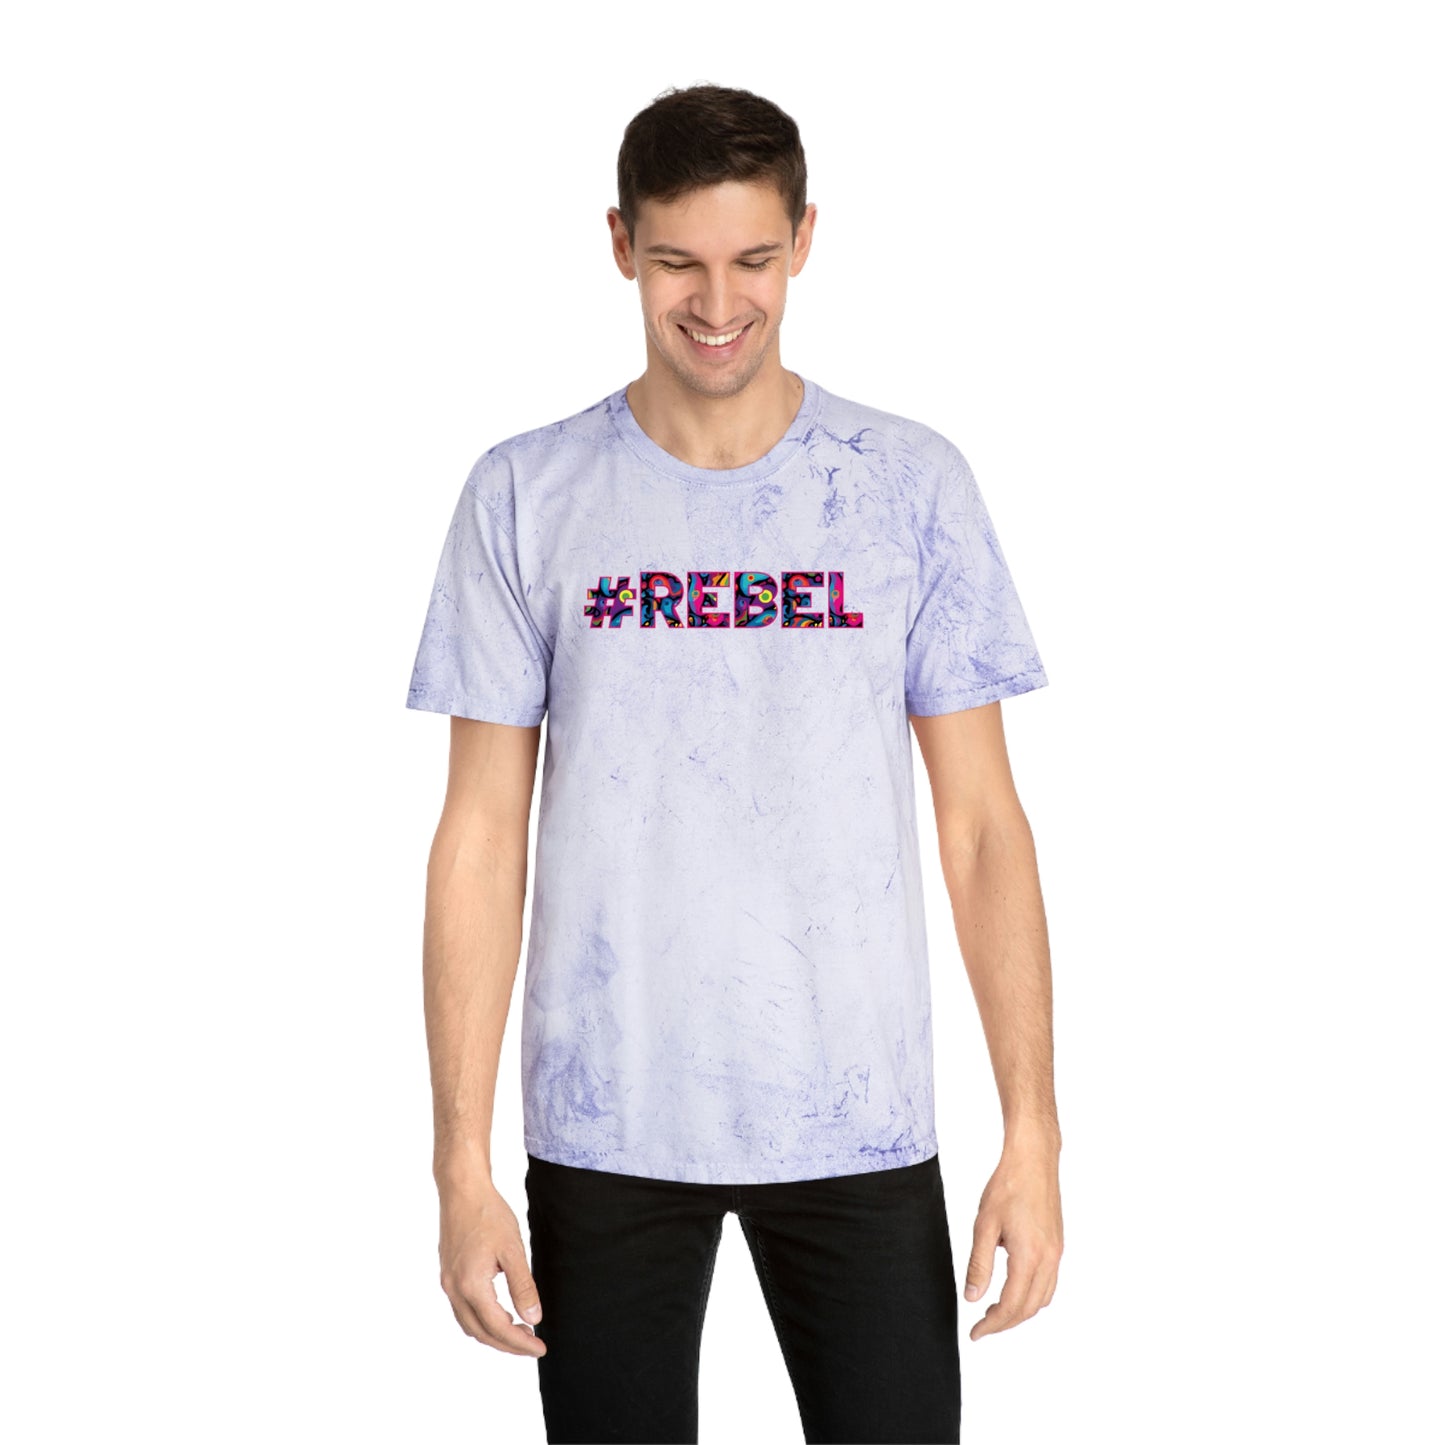 This amethyst rebel tie die is for men who have a rebellious spirit! With our #Rebel meme at the front of the Tee, you make sure everyone who looks at you knows that you are a rebel!